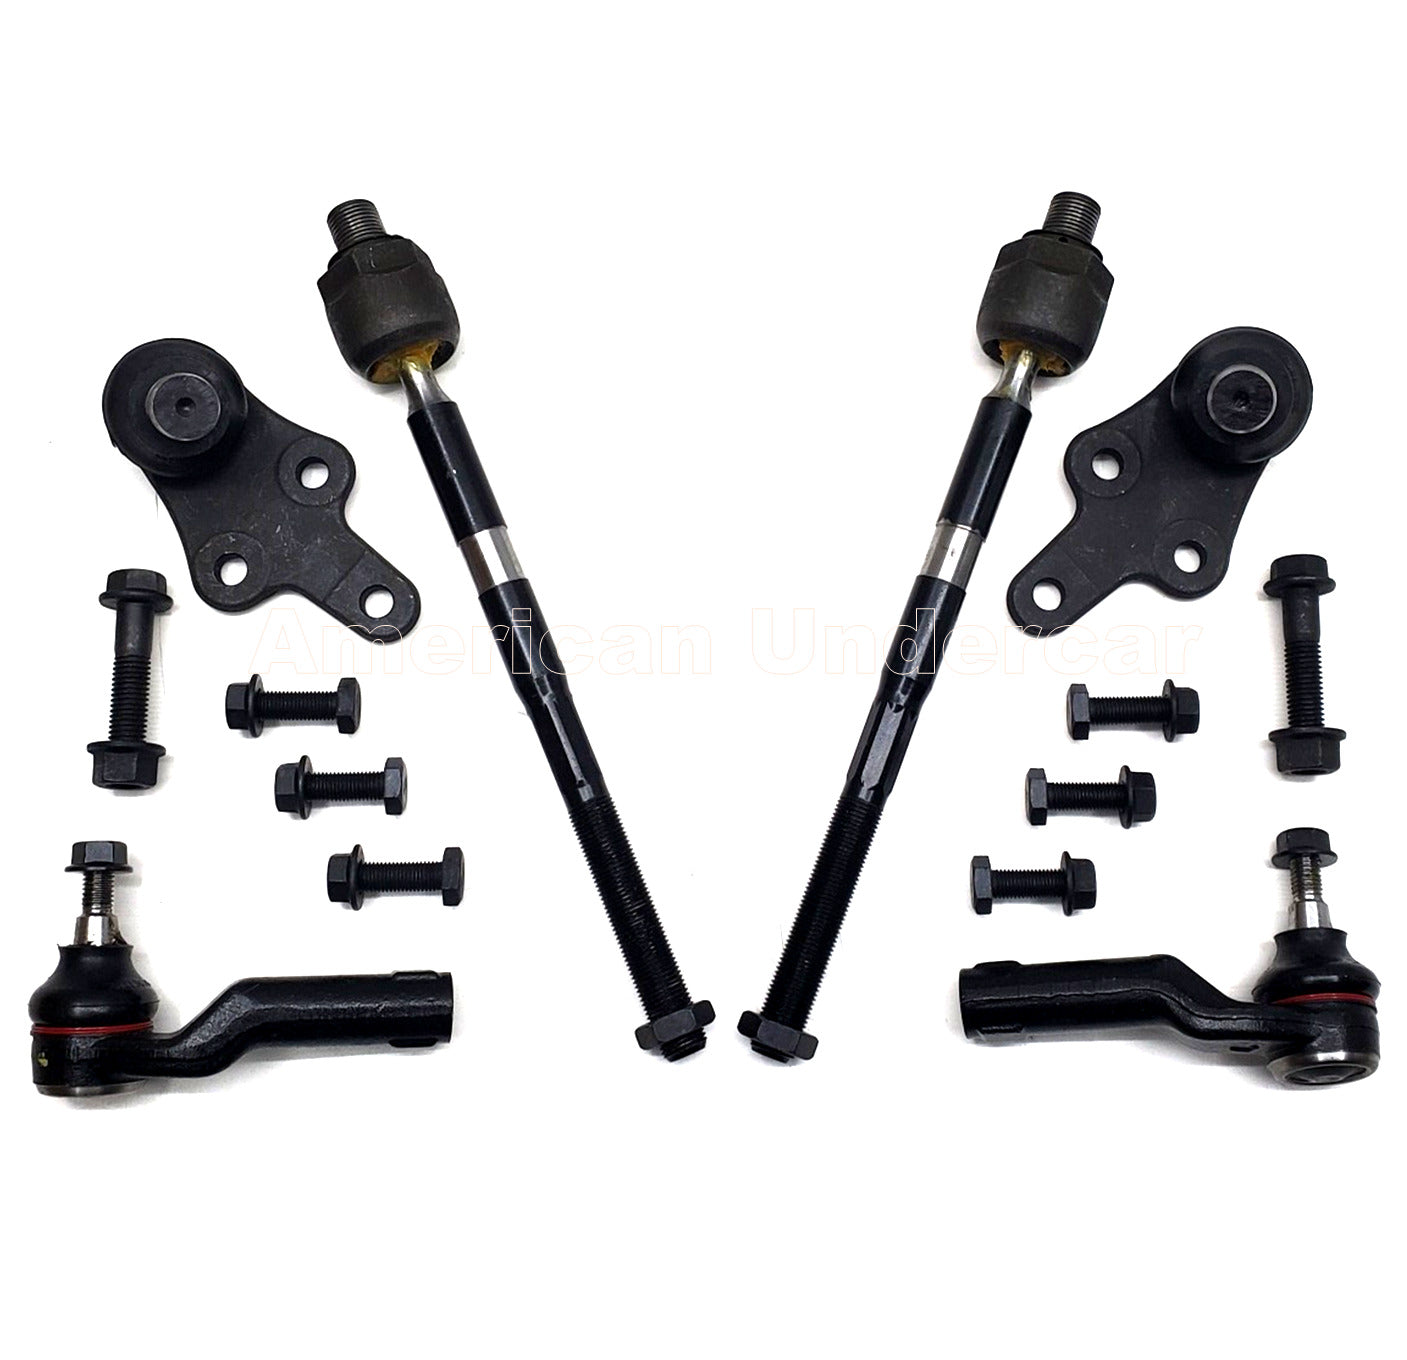 XRF Ball Joints Tie Rod Steering Suspension Kit for 2014-2019 Ford Transit Connect 2WD